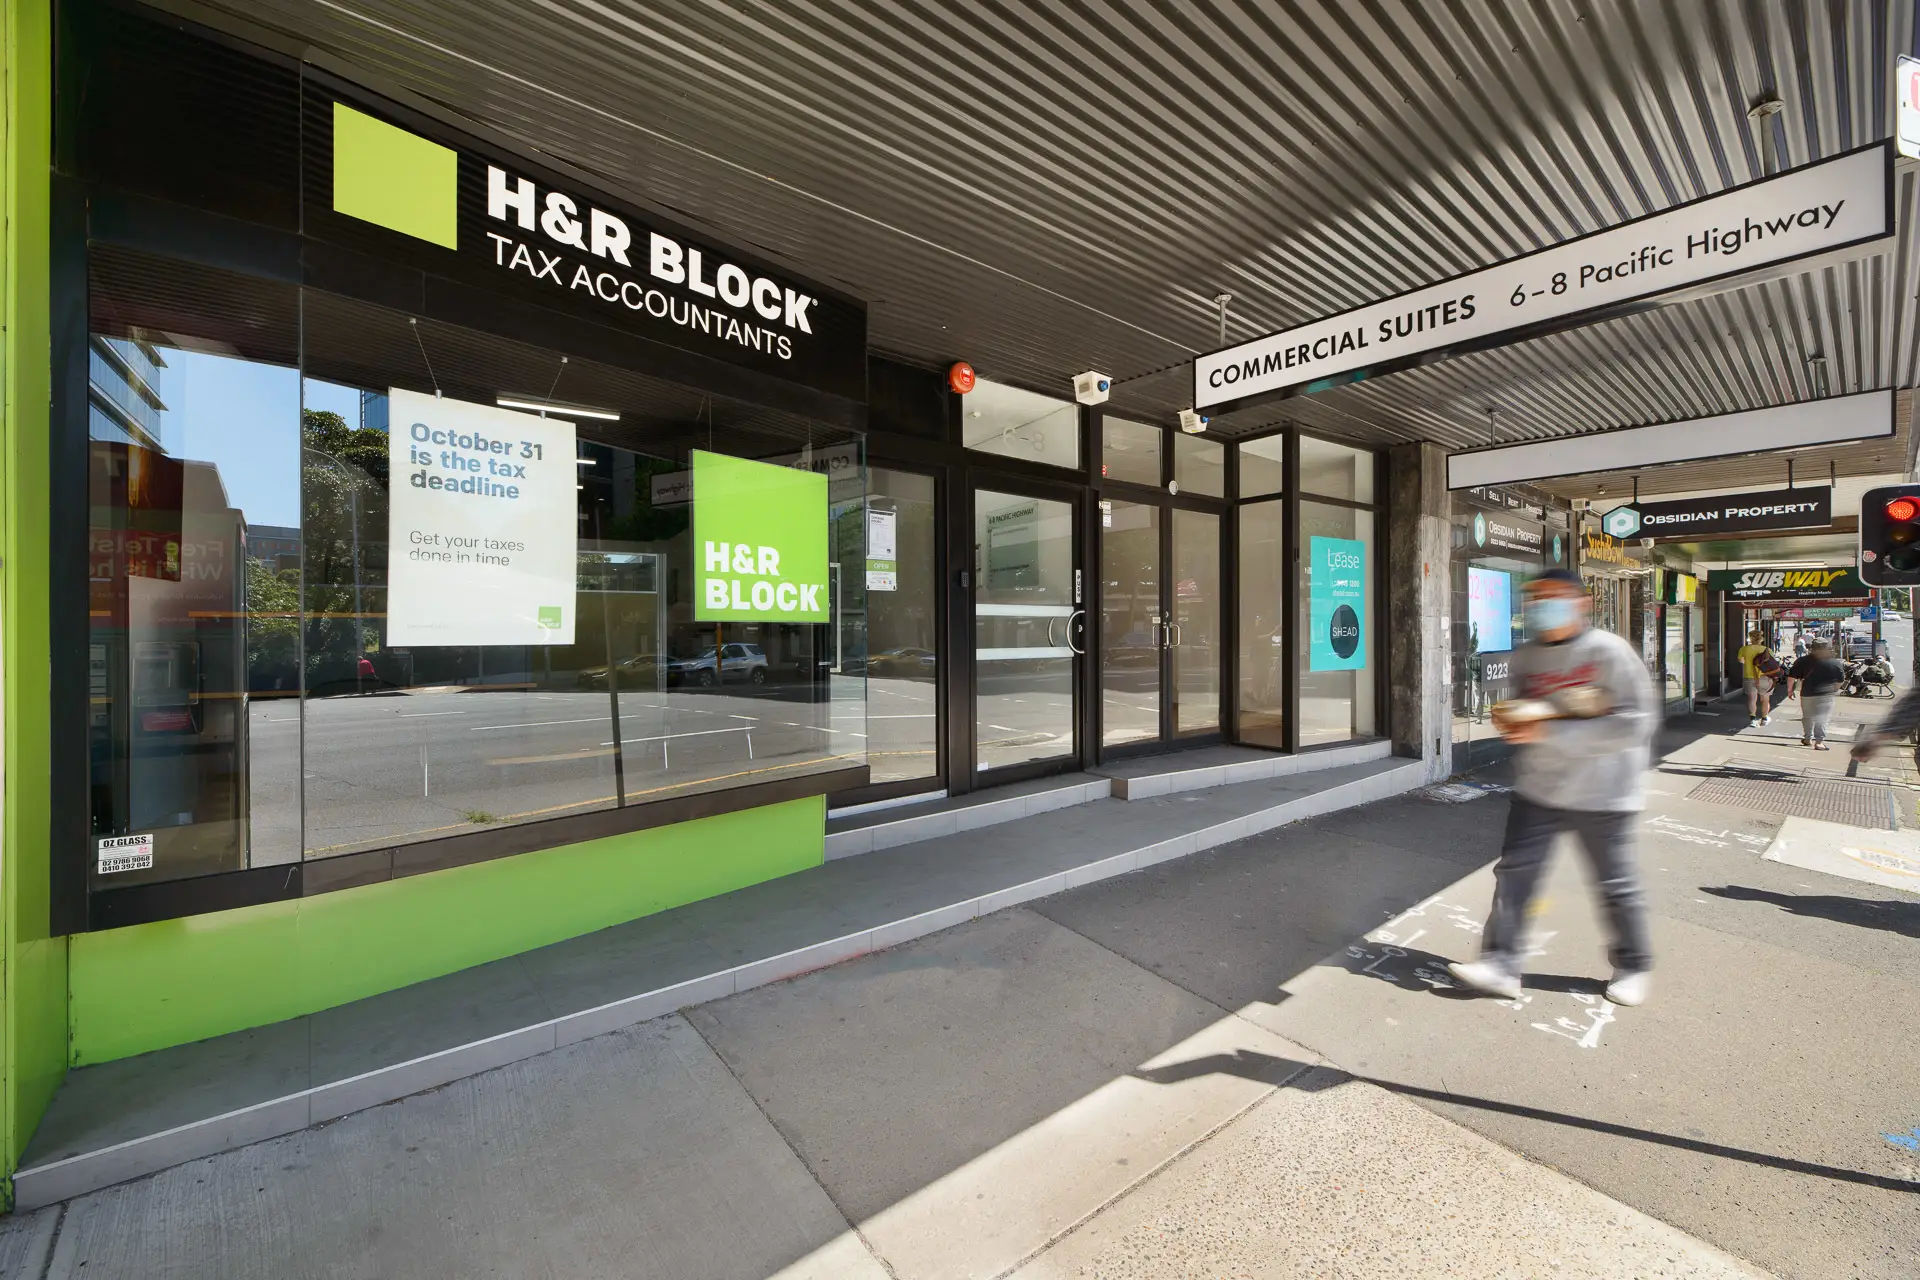 Shop 1/6-8 Pacific Highway, St Leonards For Lease by Shead Property - image 1